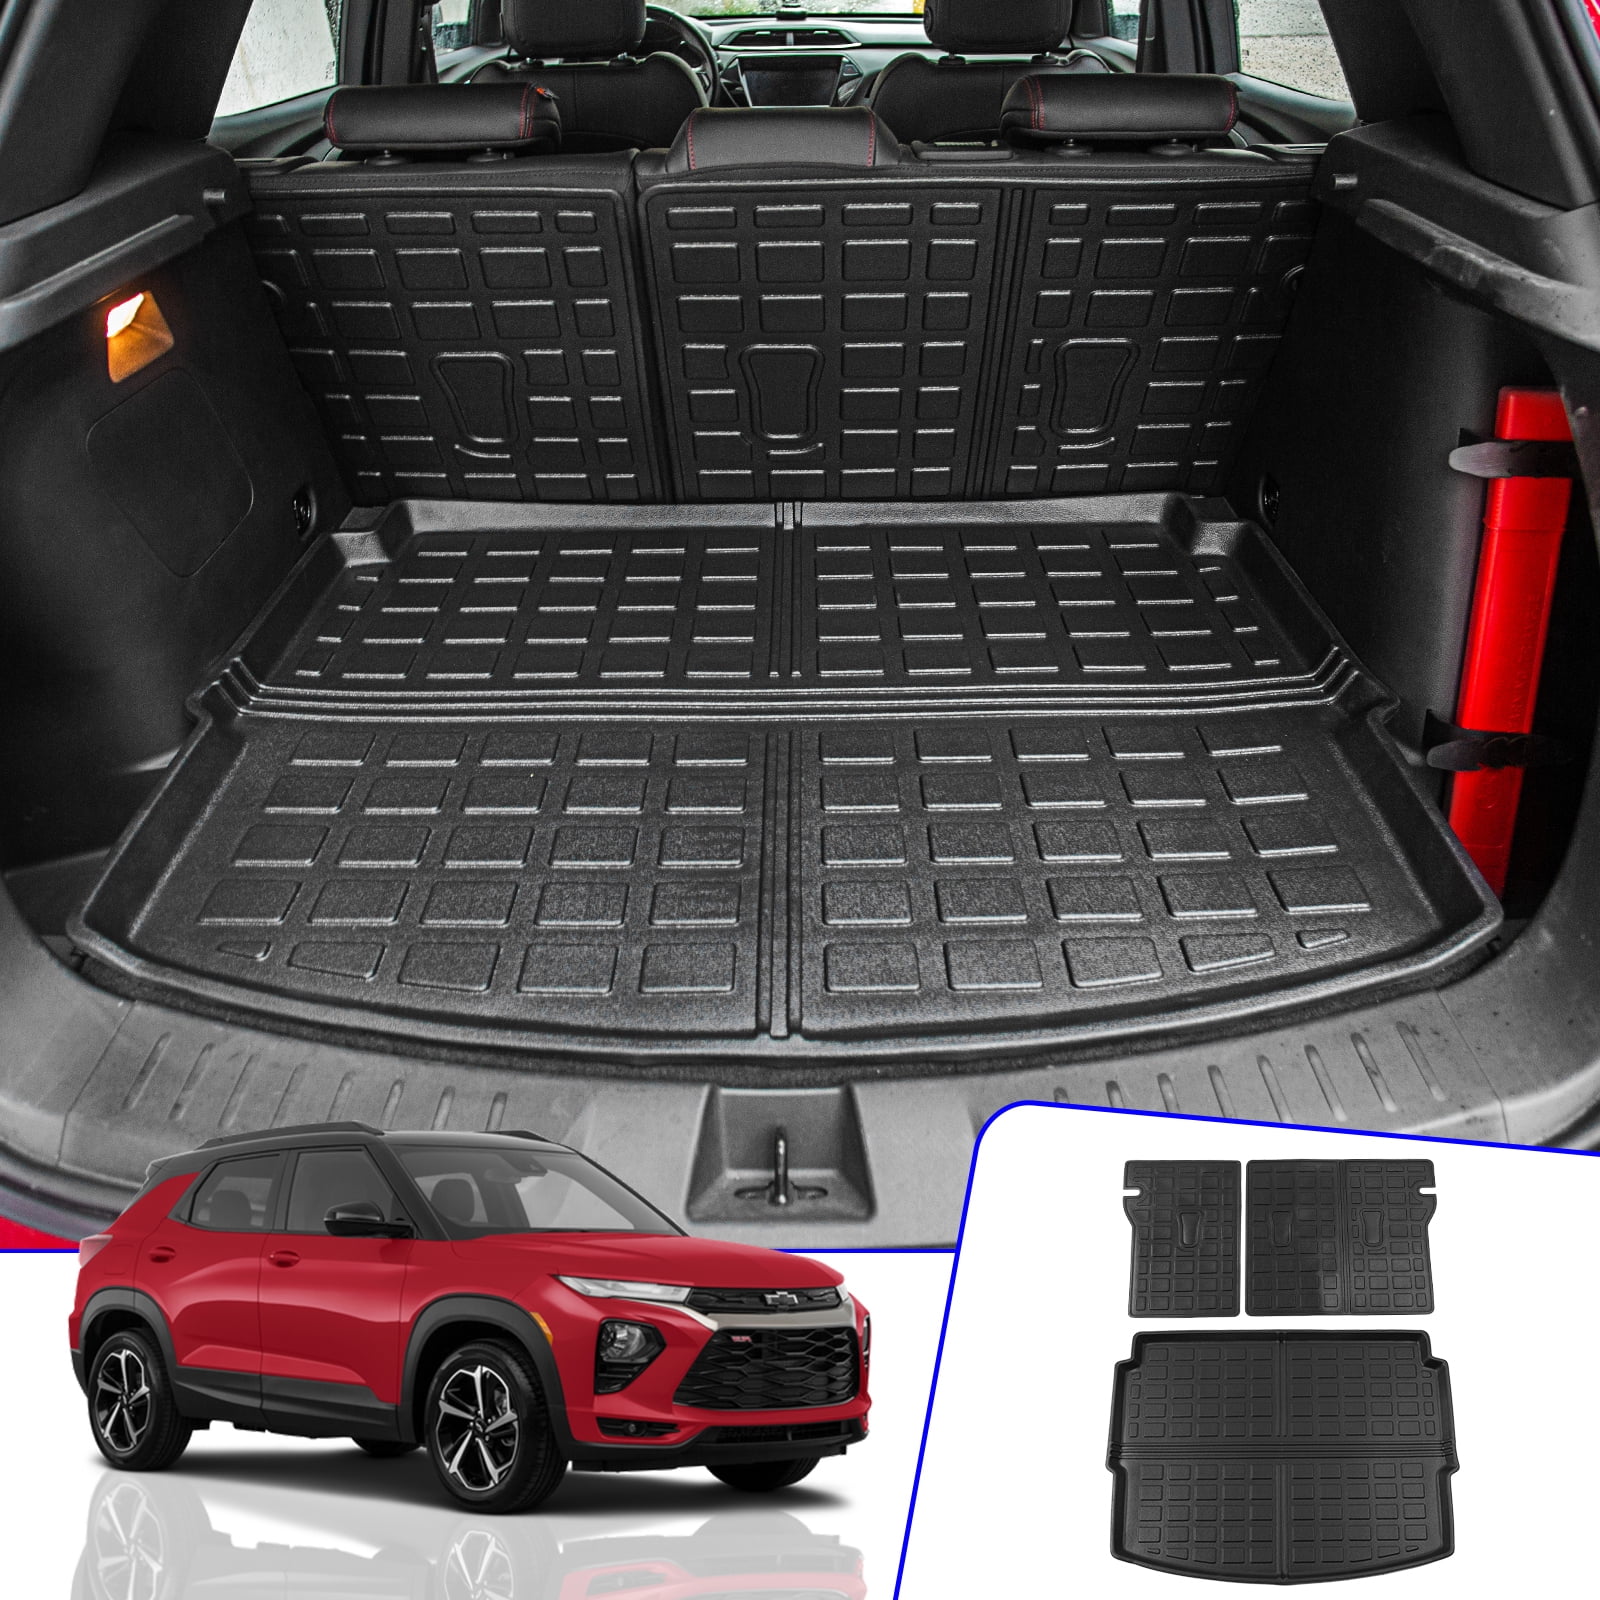 Cargo Mats) Tahoe Weather Yukon TPE (Trunk All Protector Cover 2022-2023 Chevy Trunk Liner Mat+Backrest Chevrolet 2022 GMC Cargo Mat Accessories Back Mat Seat Fit Tahoe